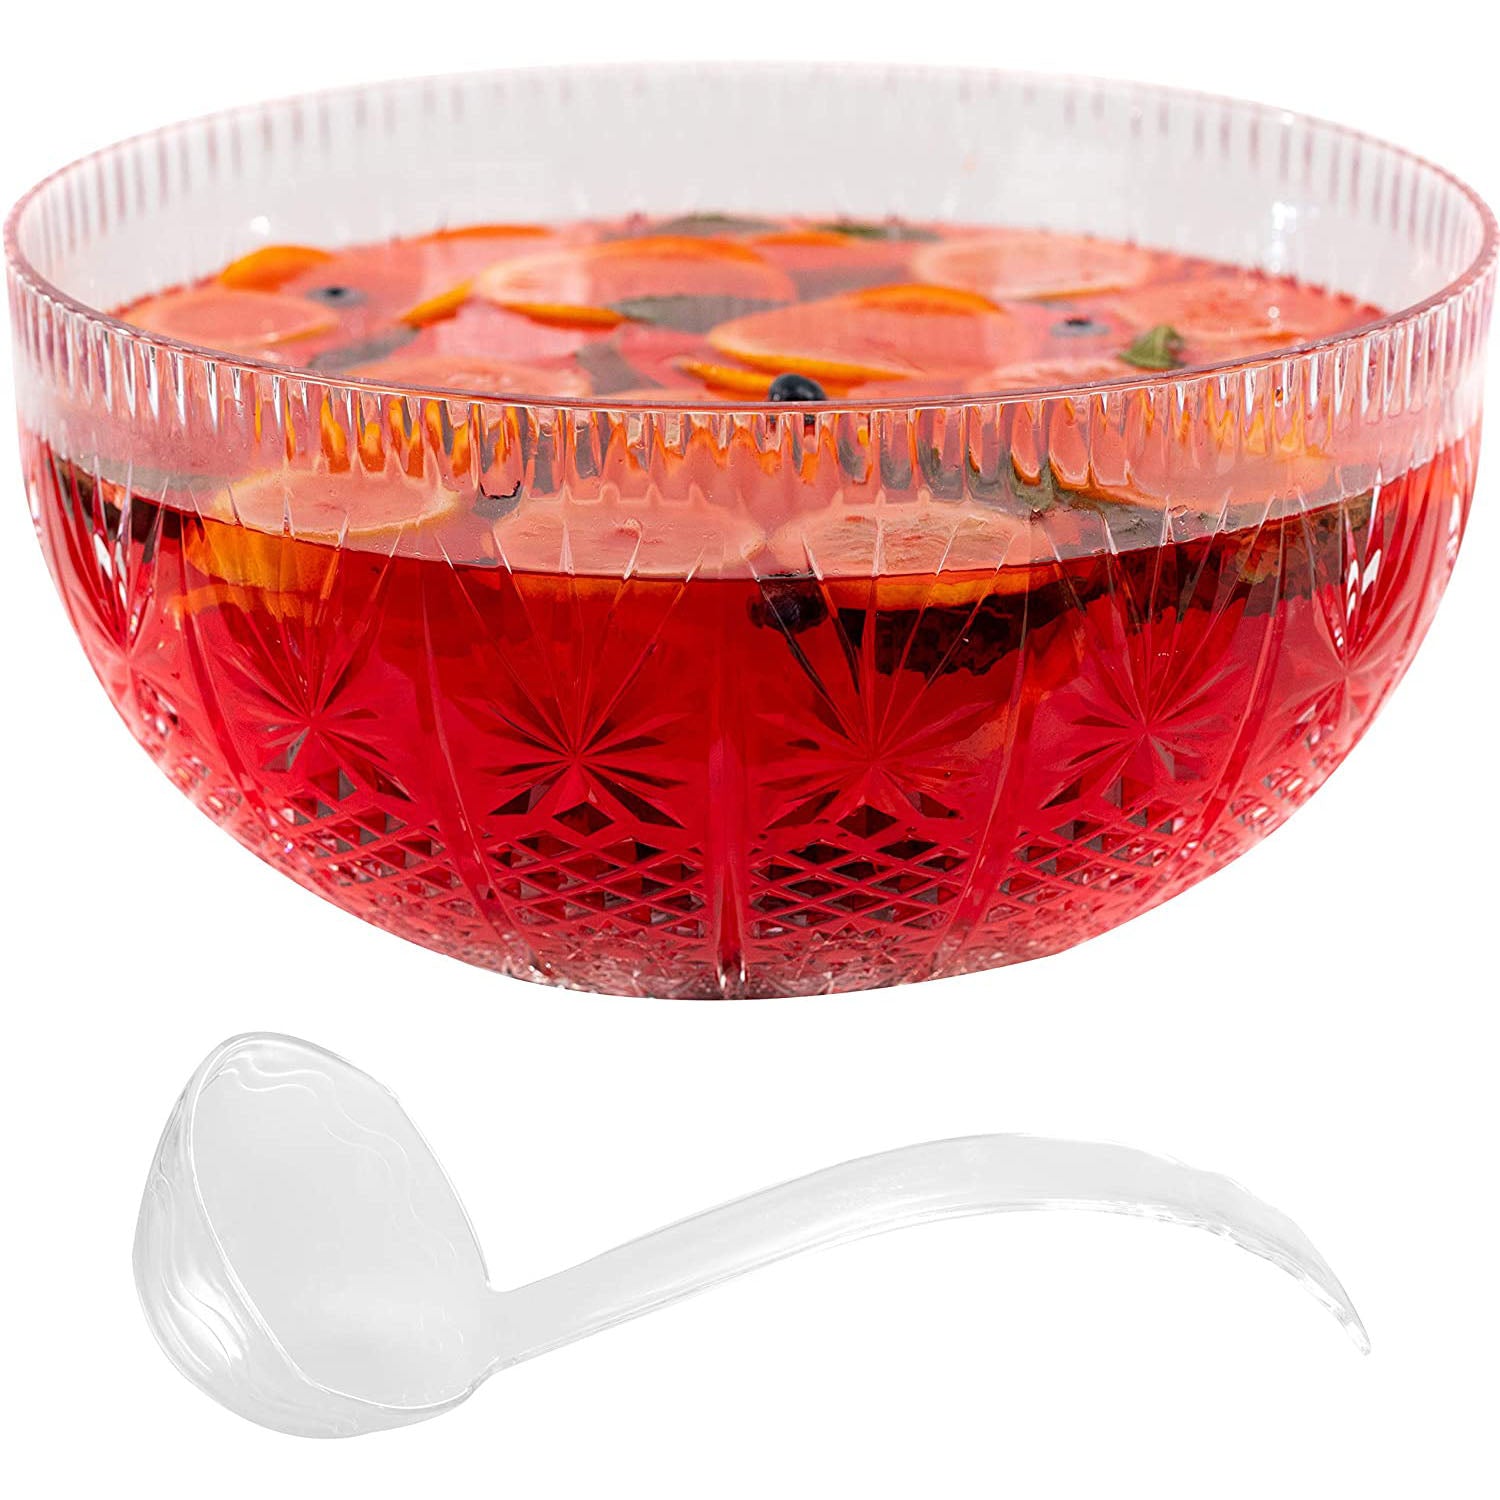 12 CLEAR PLASTIC PUNCH BOWL CUP S HOOKS HANGERS PUNCHBOWL